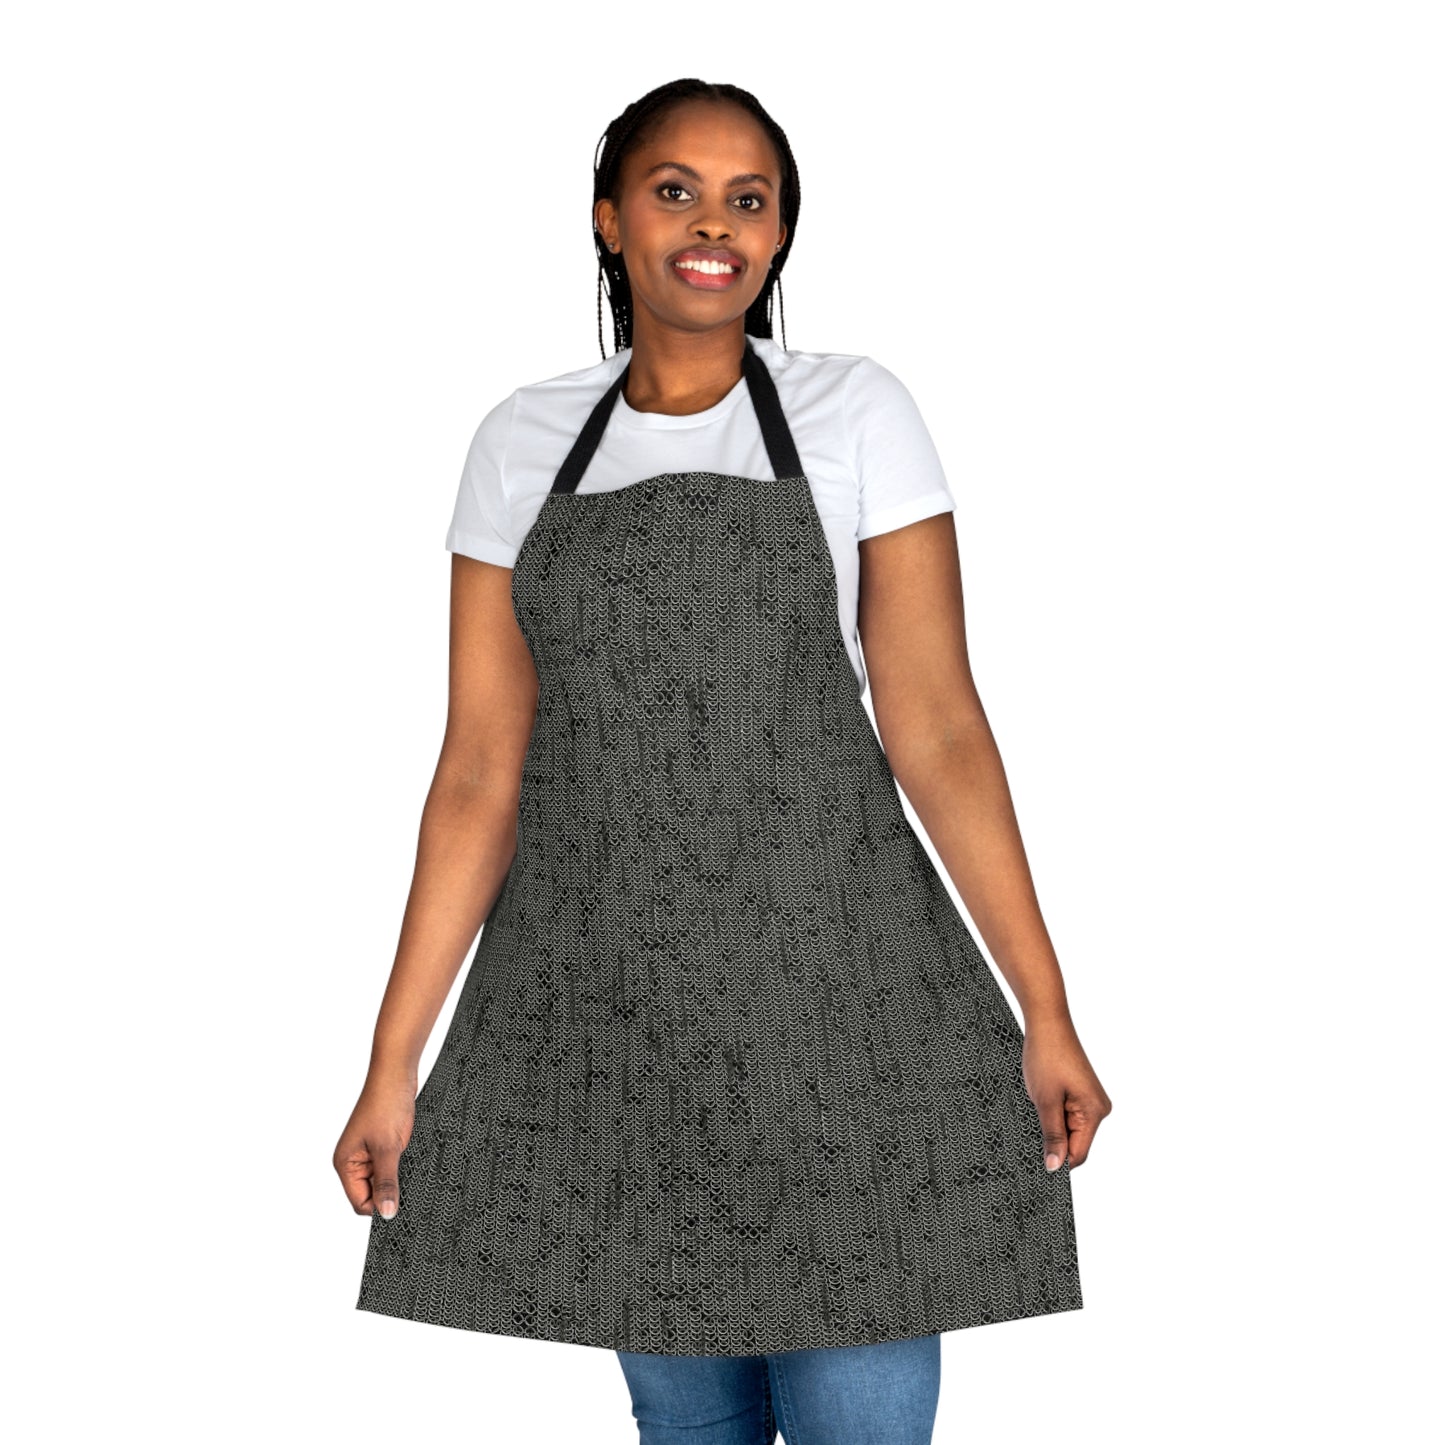 Chainmail Chef Print Apron